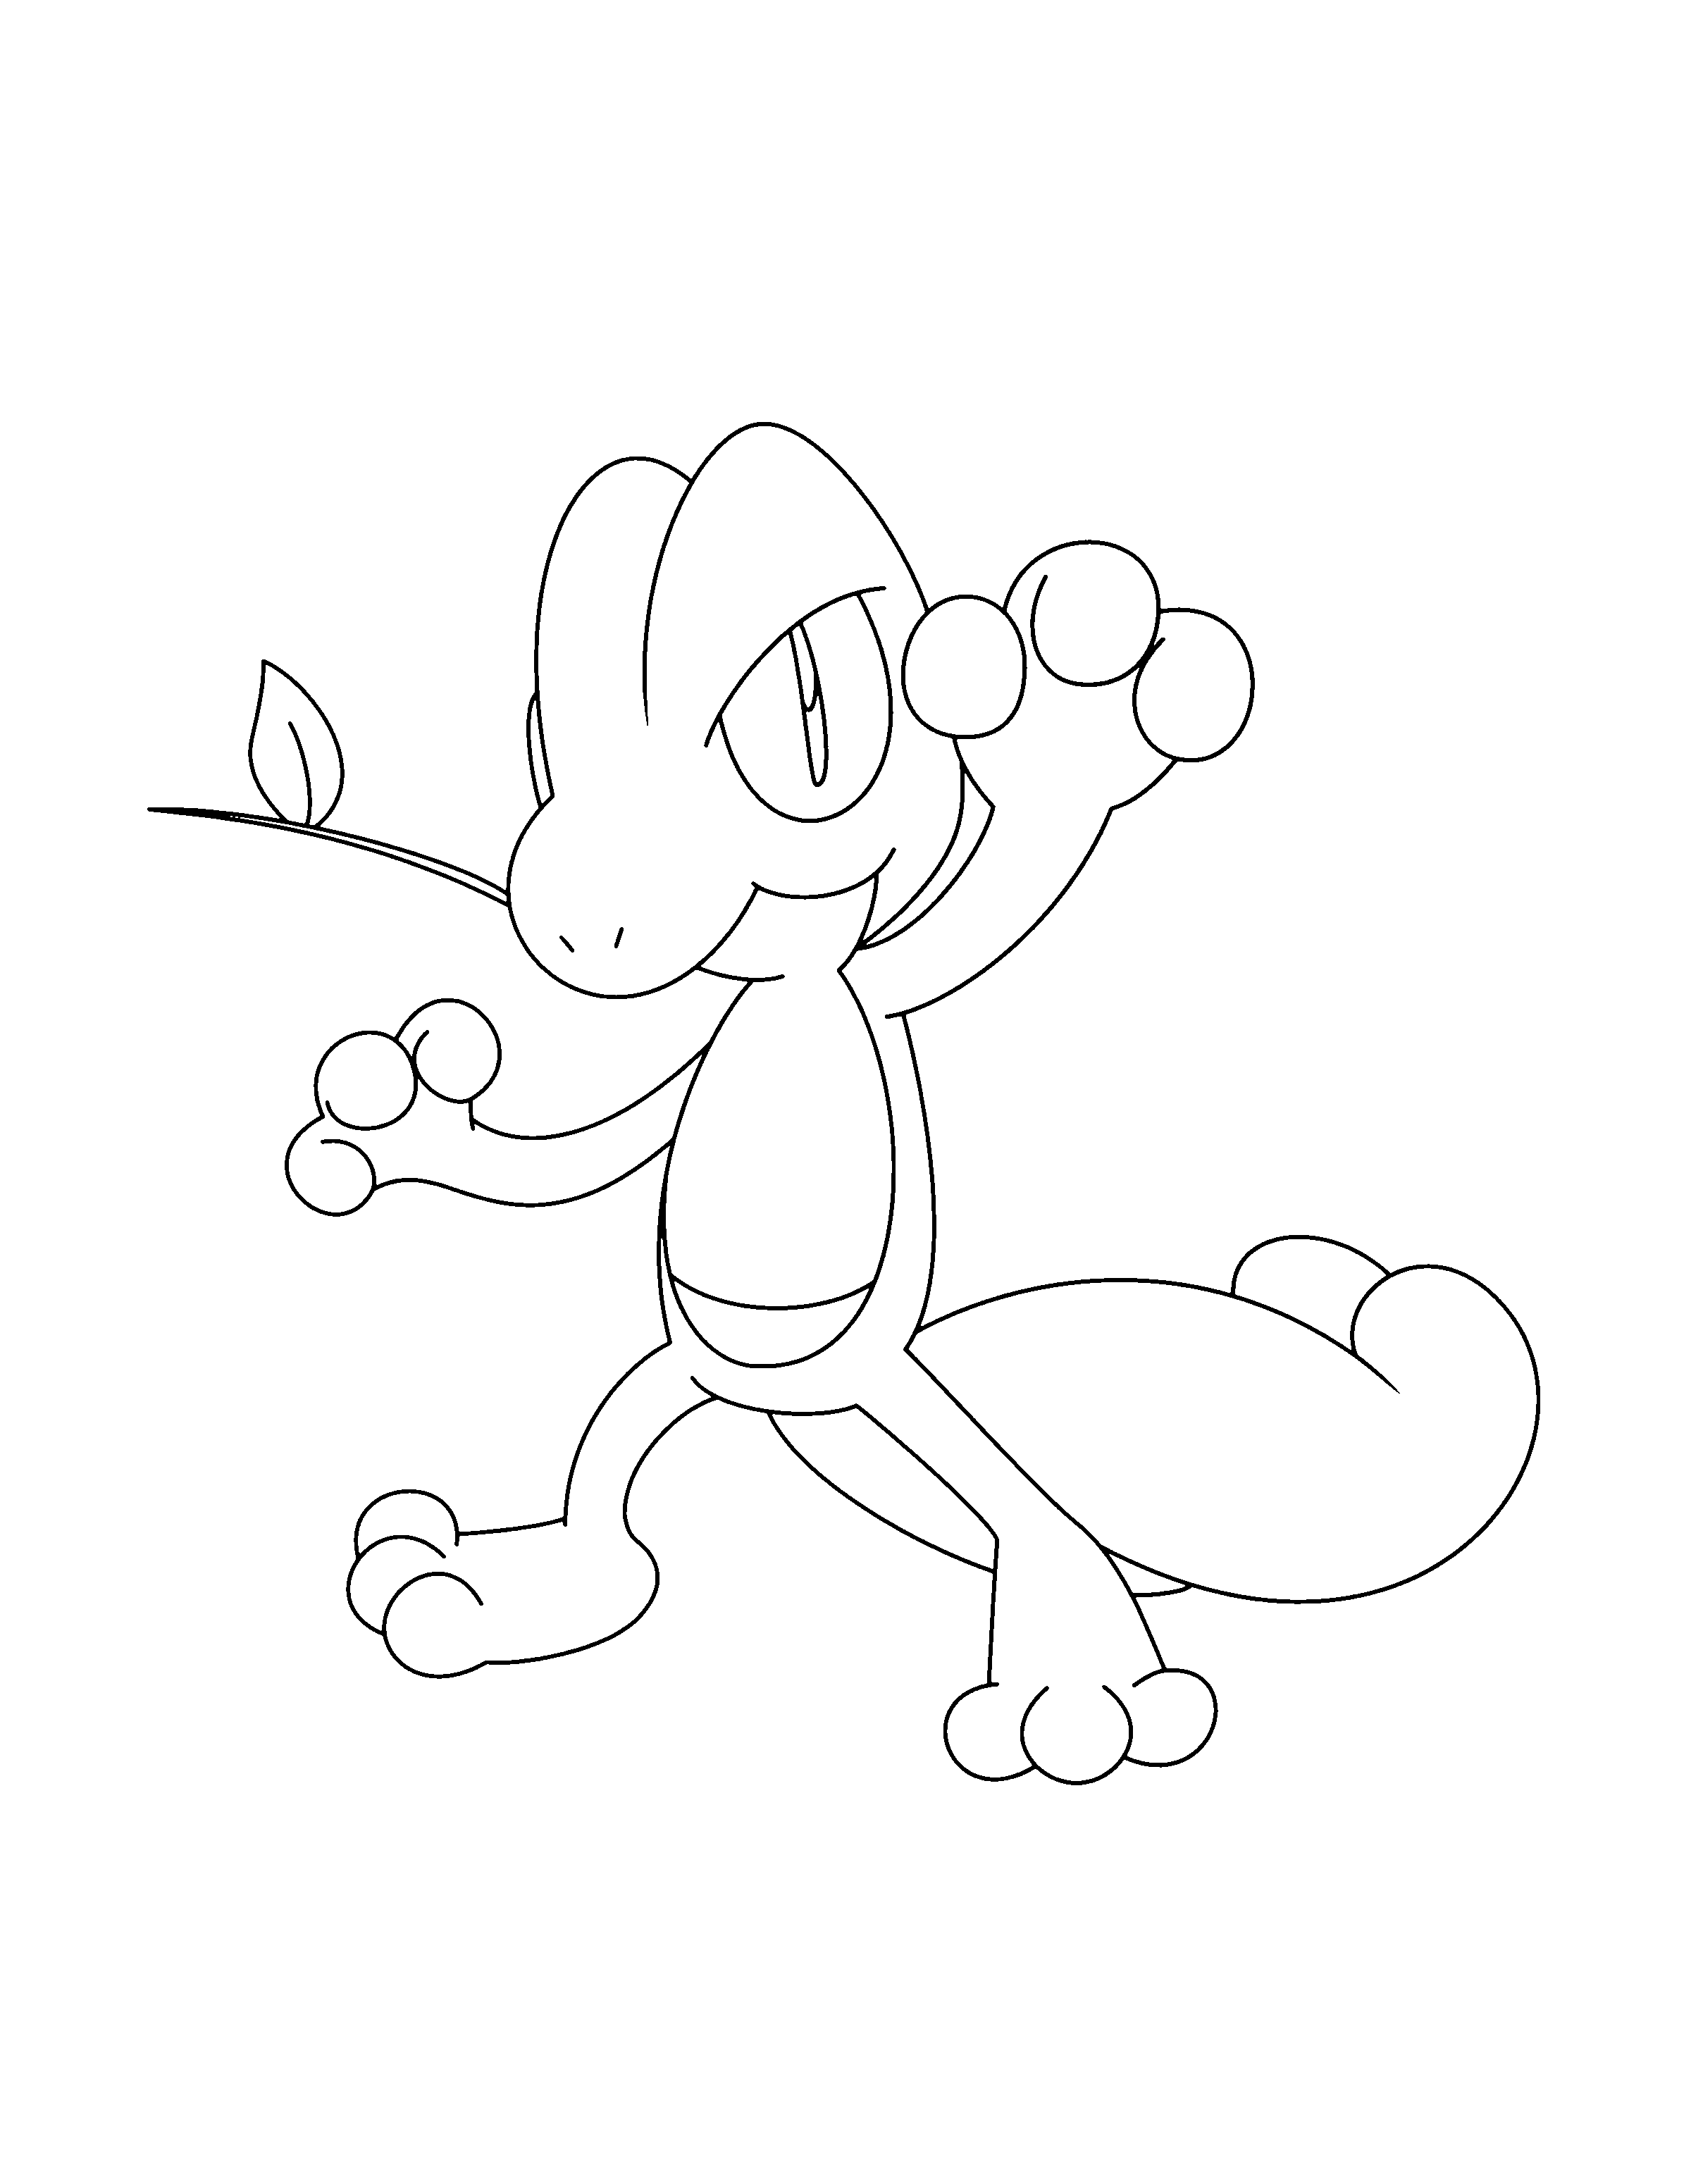 animated-coloring-pages-pokemon-image-0801